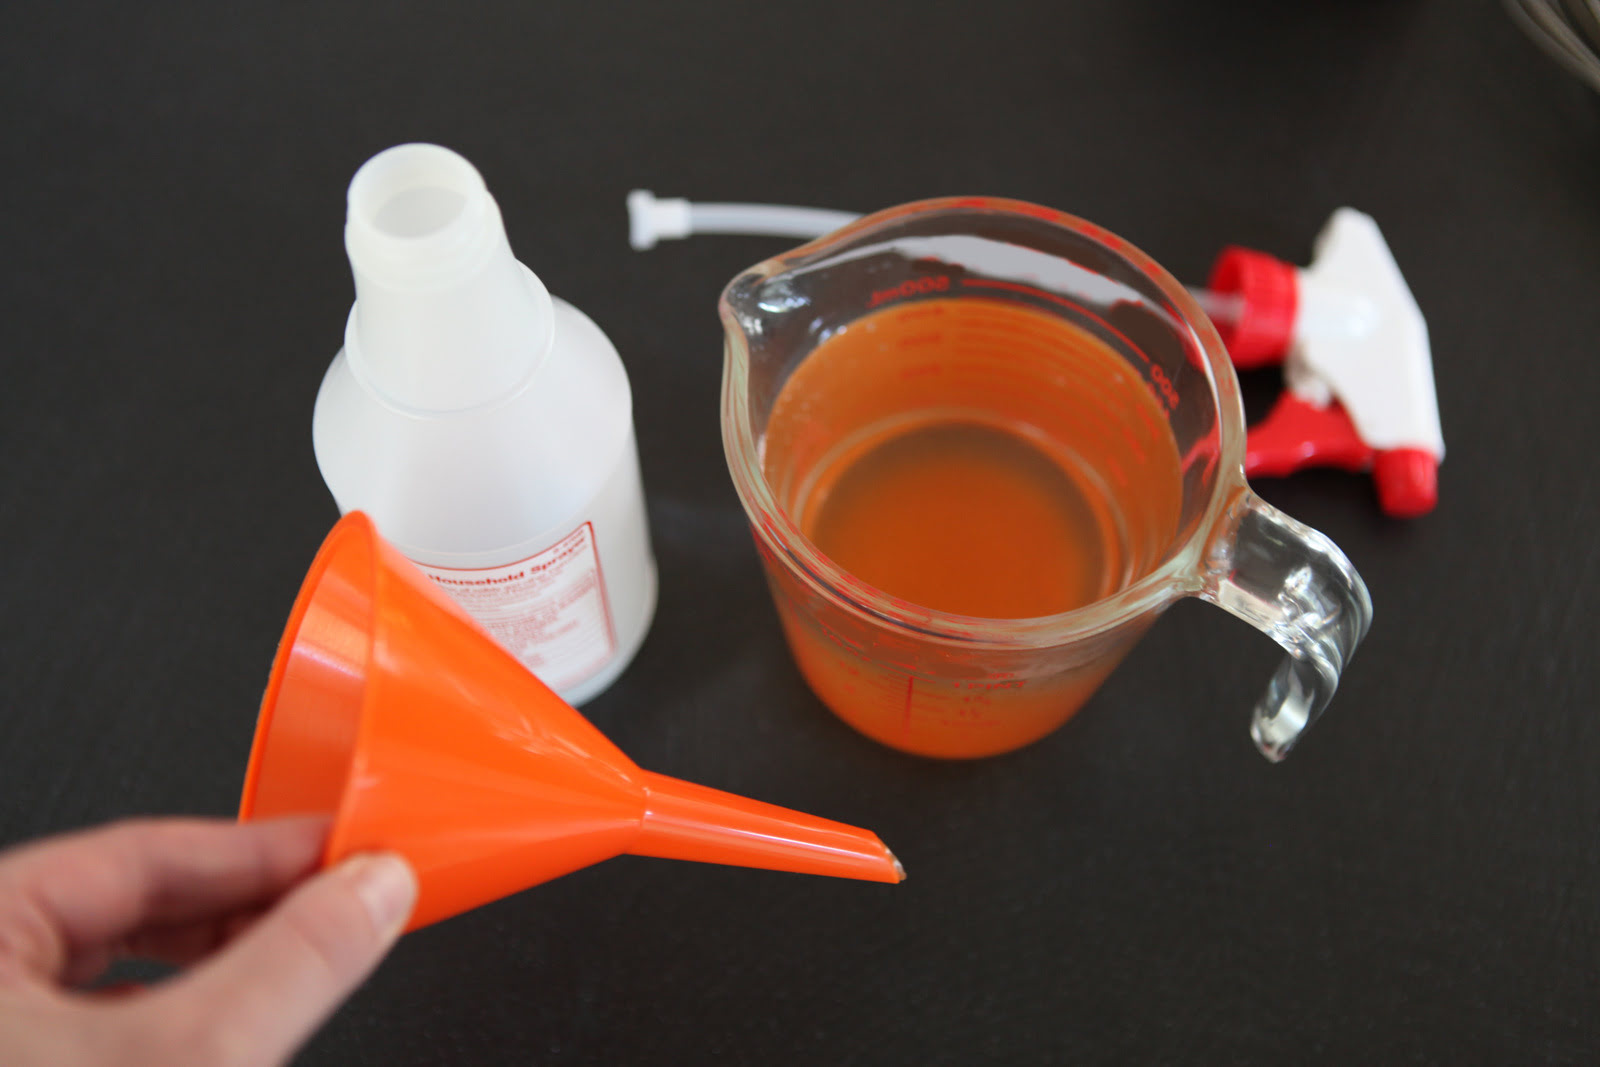 How To Make A Cayenne Pepper Spray